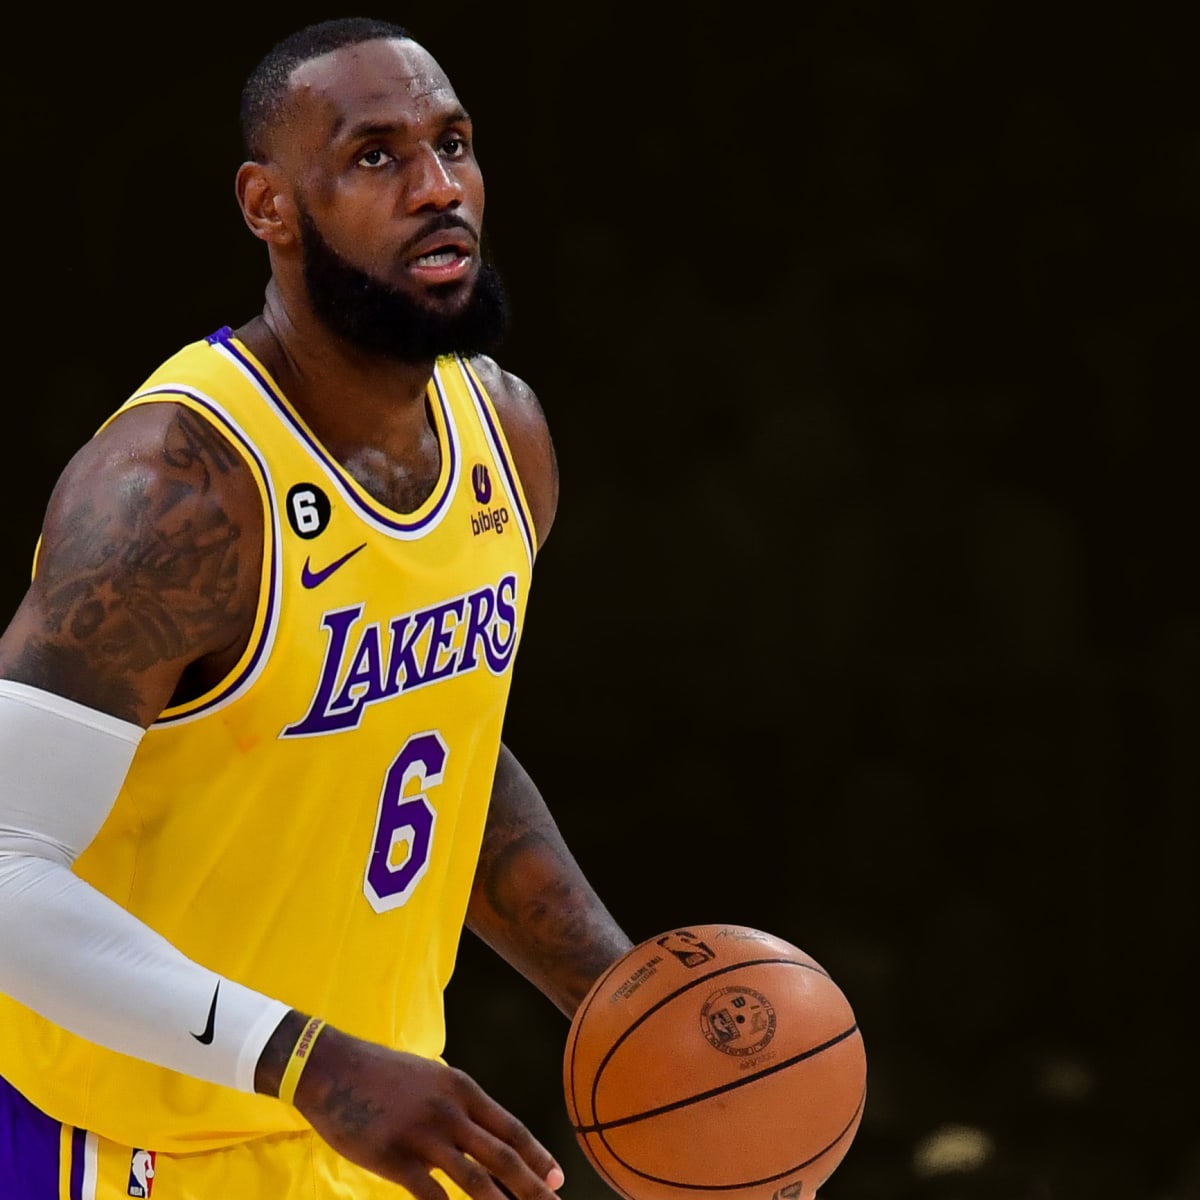 Dreaming of a New York Knicks-Los Angeles Lakers 2020 NBA Finals